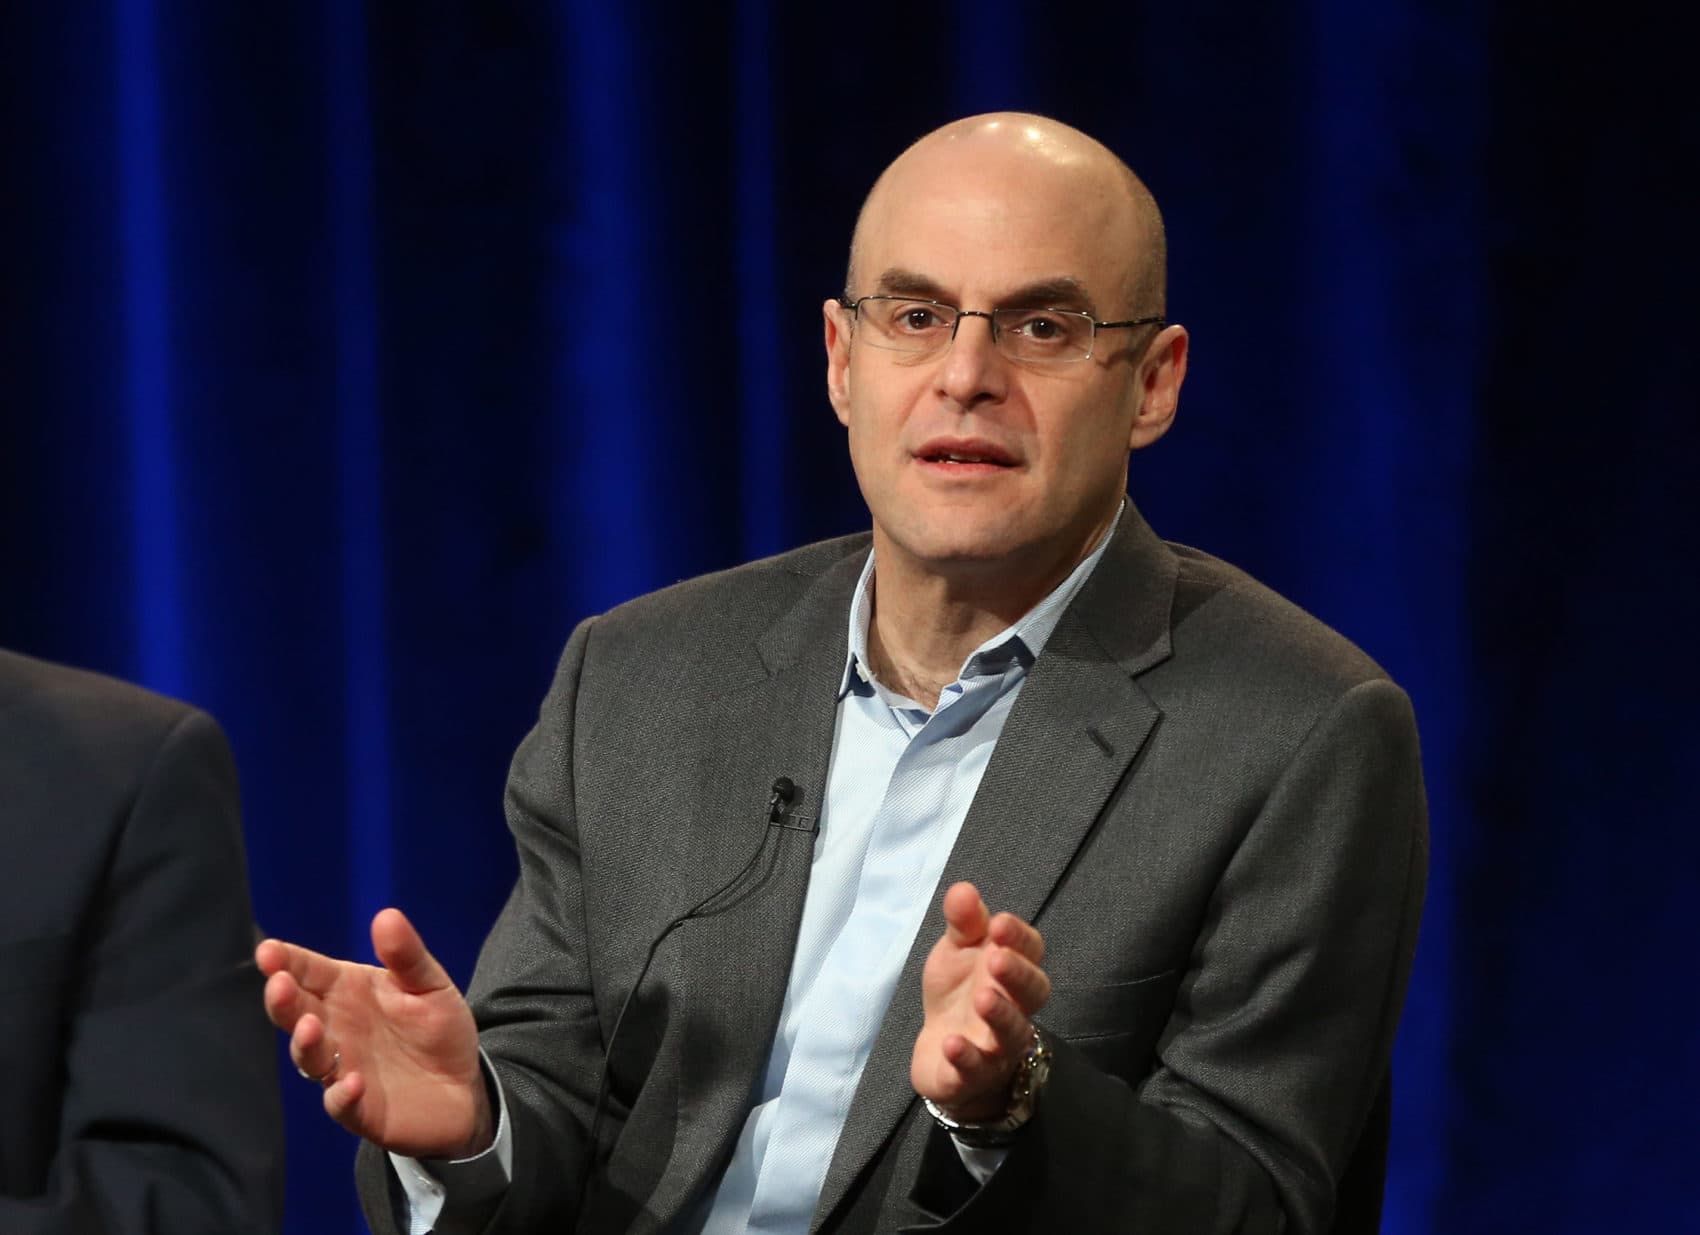 Peter Sagal has hosted Wait Wait ... Don't Tell Me! on NPR since 1998. (Frederick M. Brown/Getty Images)